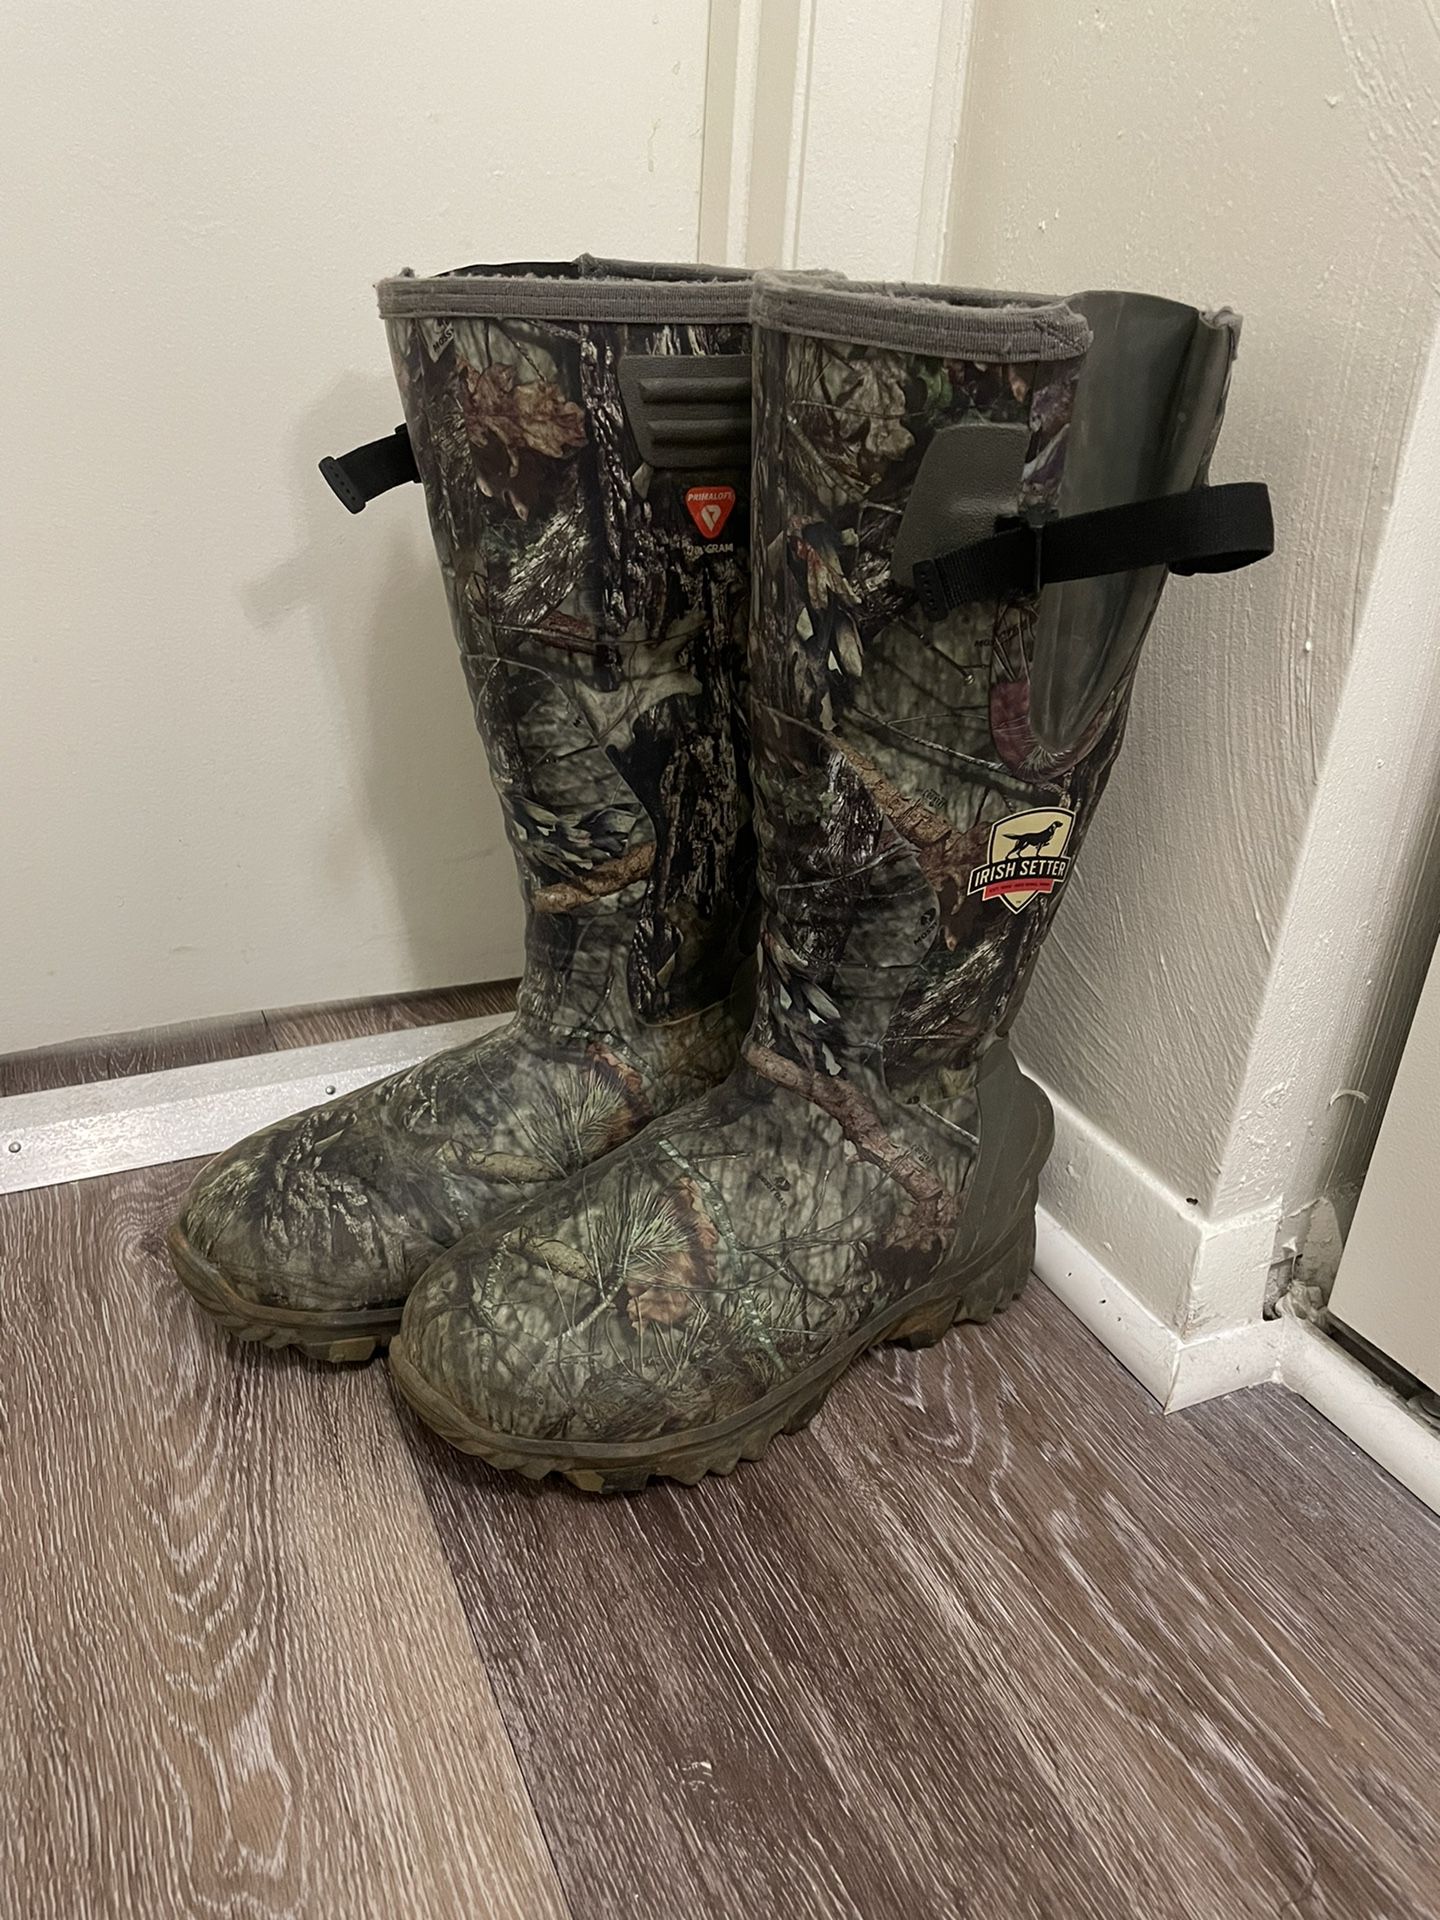 Hunting Boots